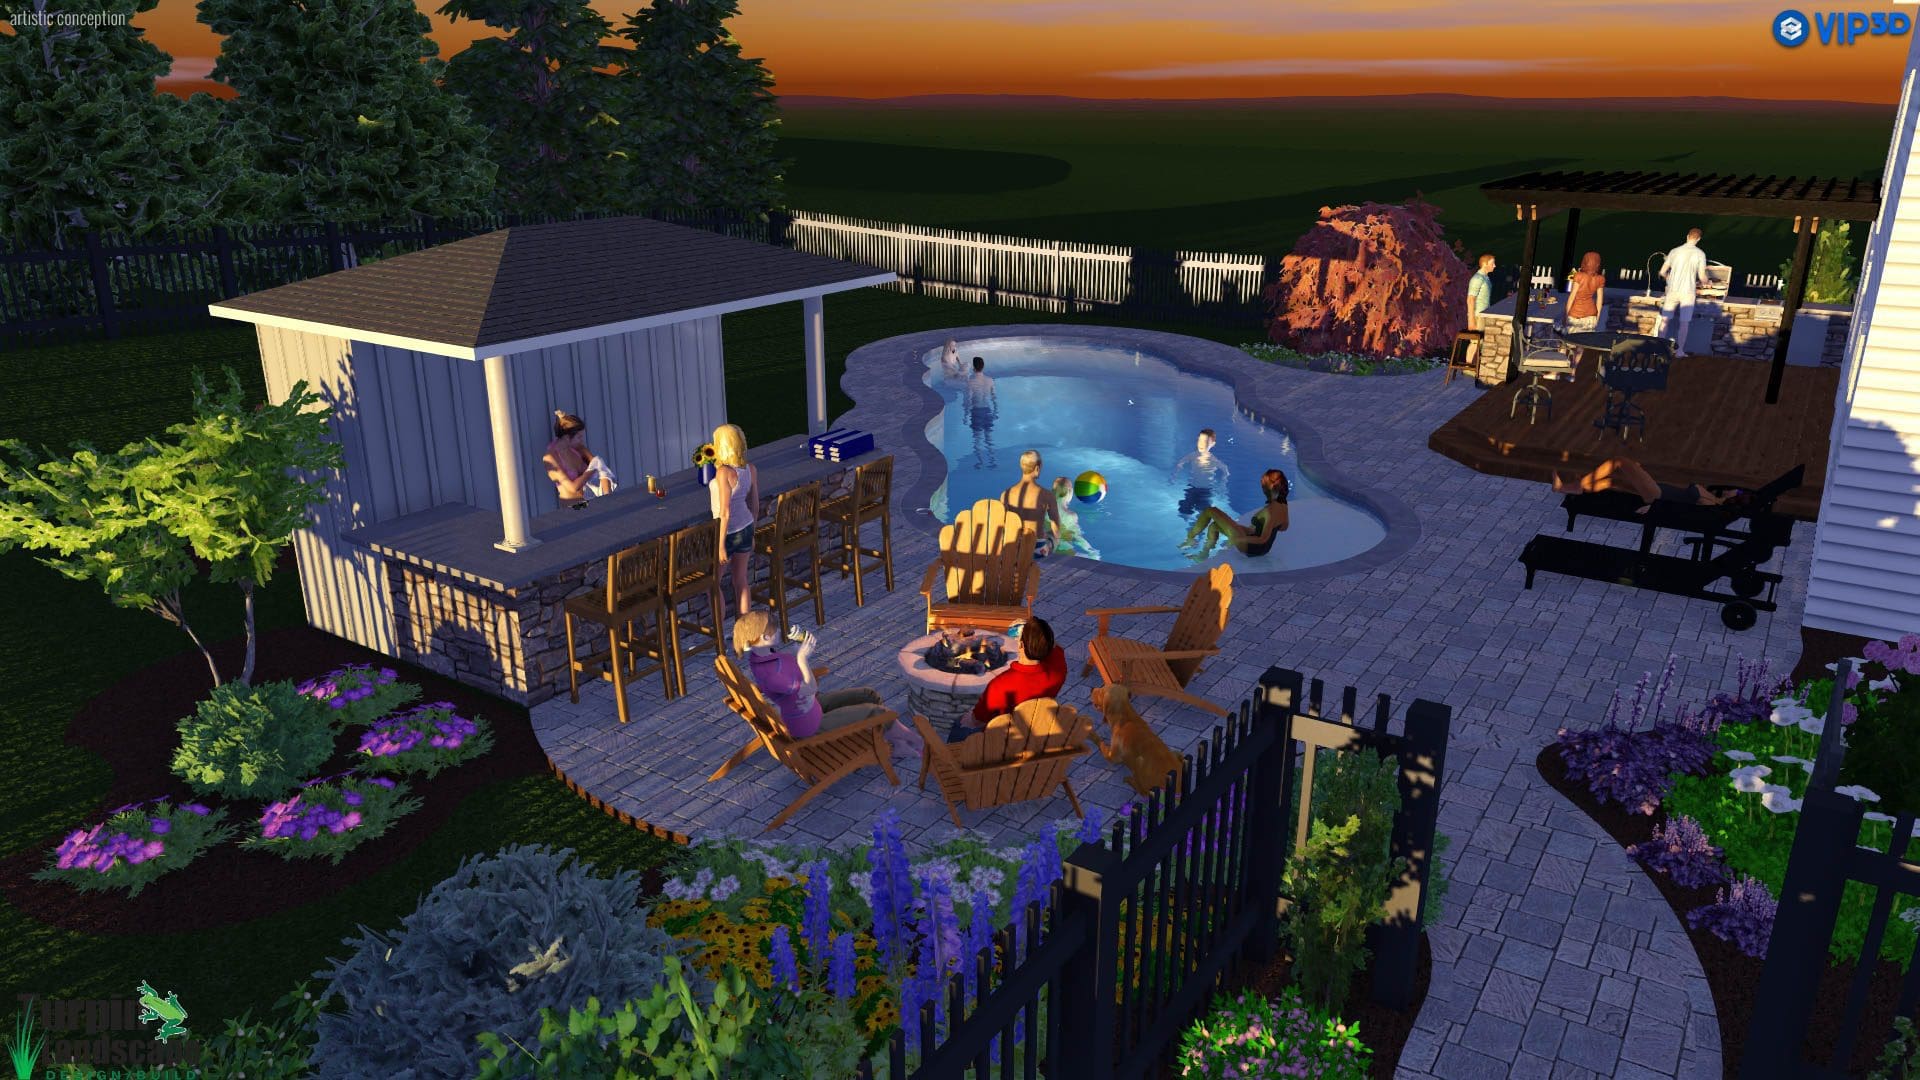 Pool Design Company West Chester, PA